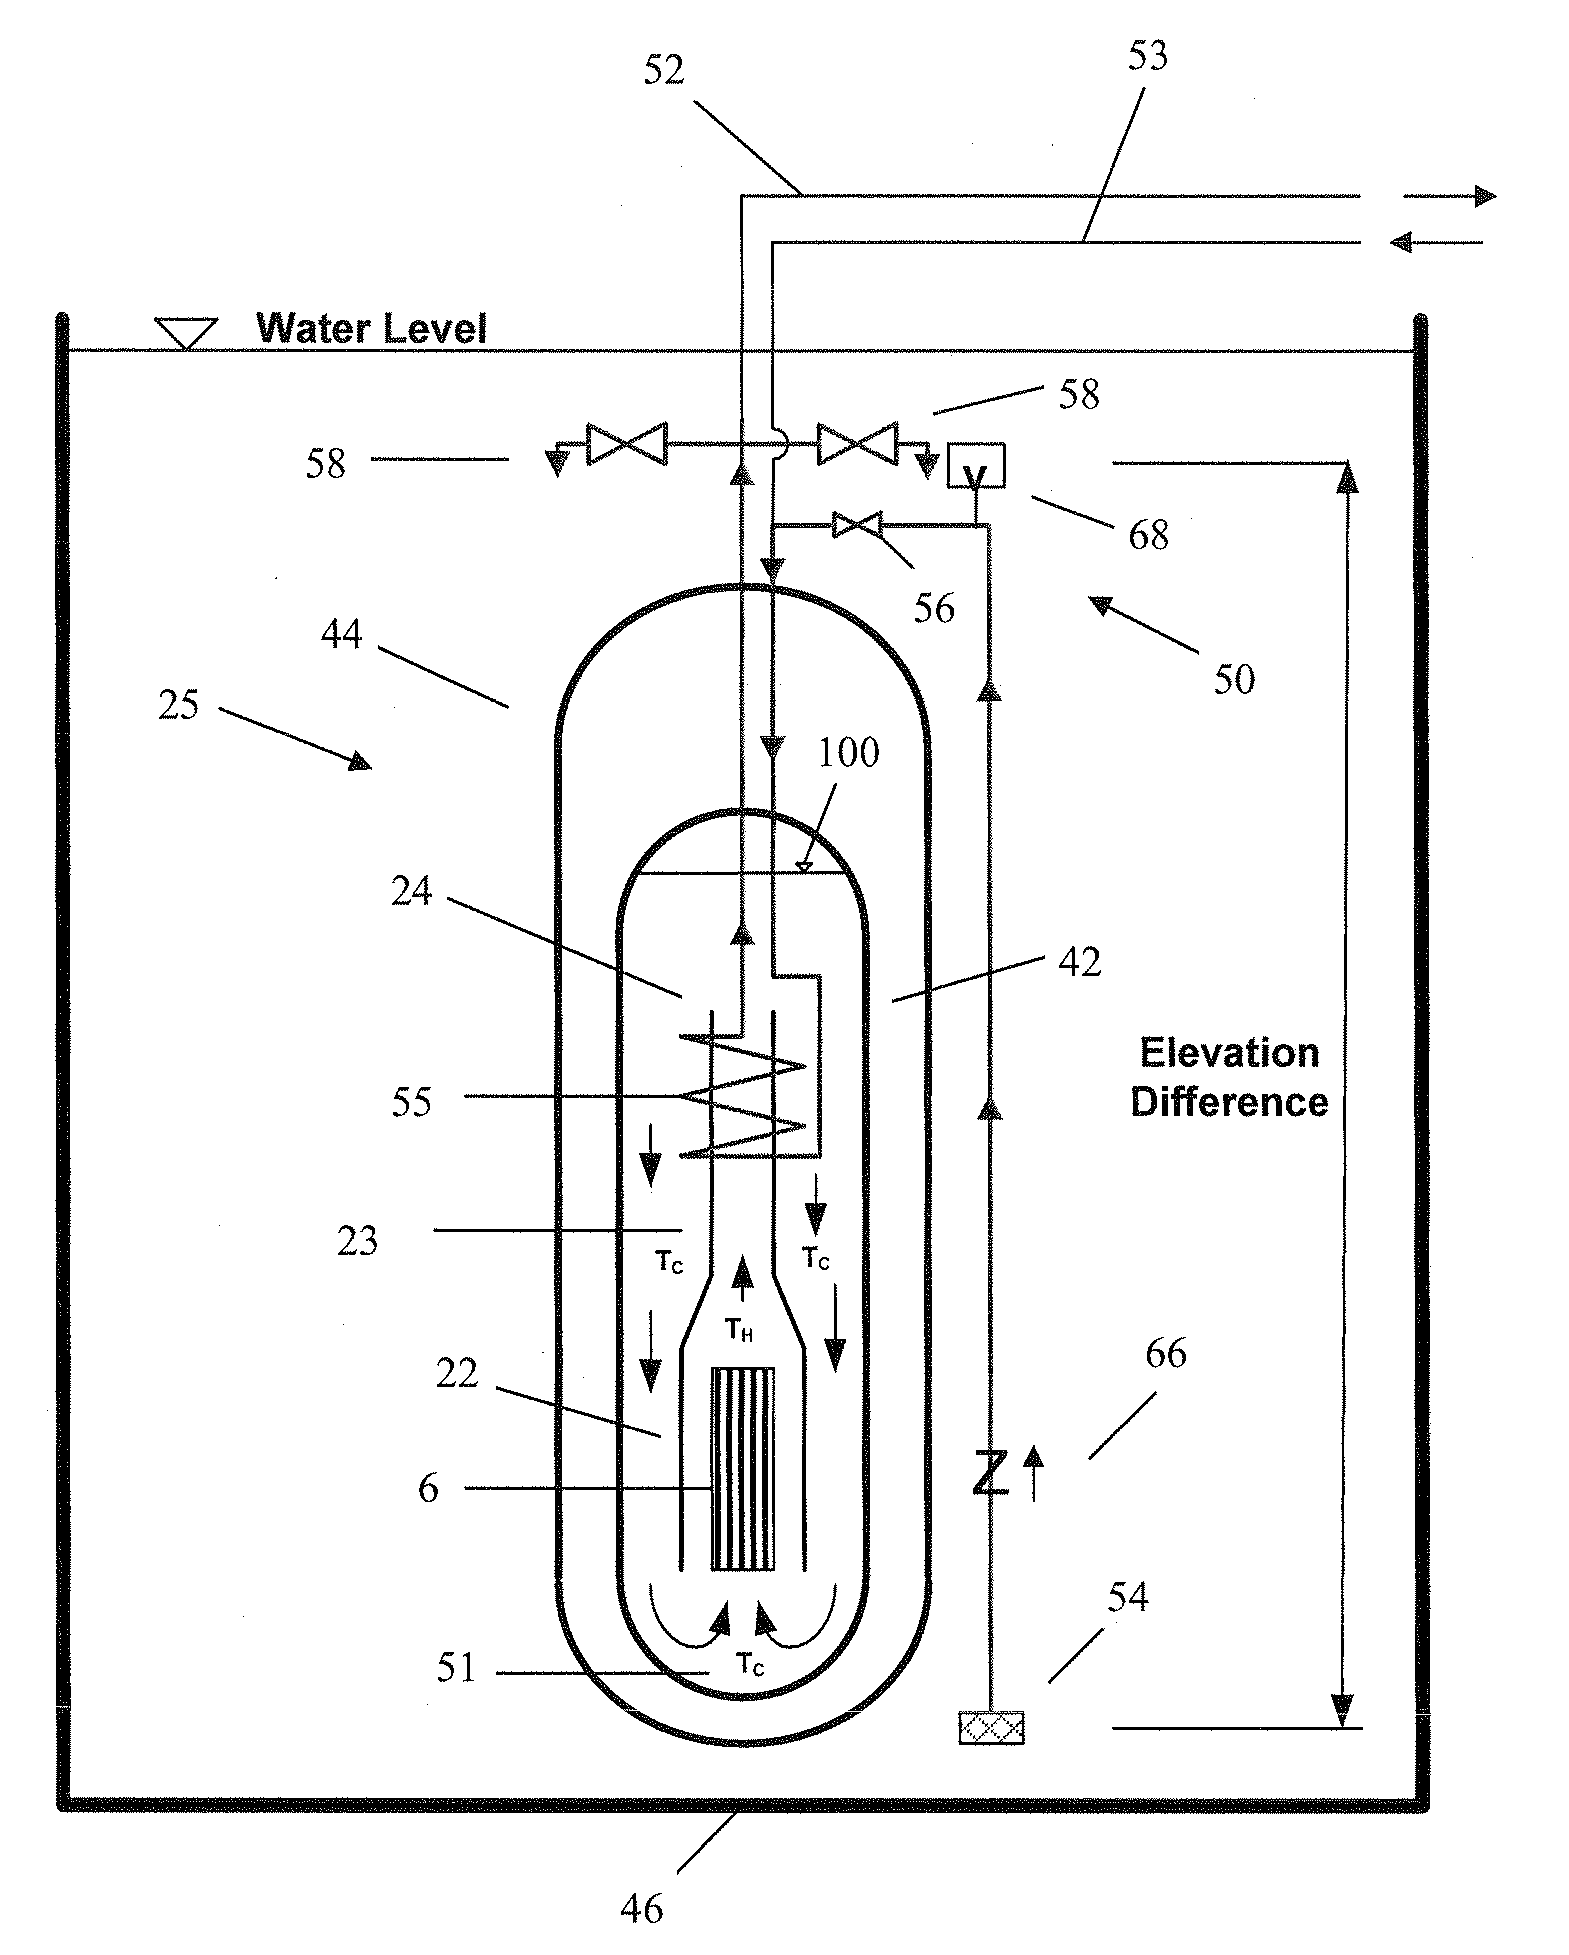 Passive emergency feedwater system